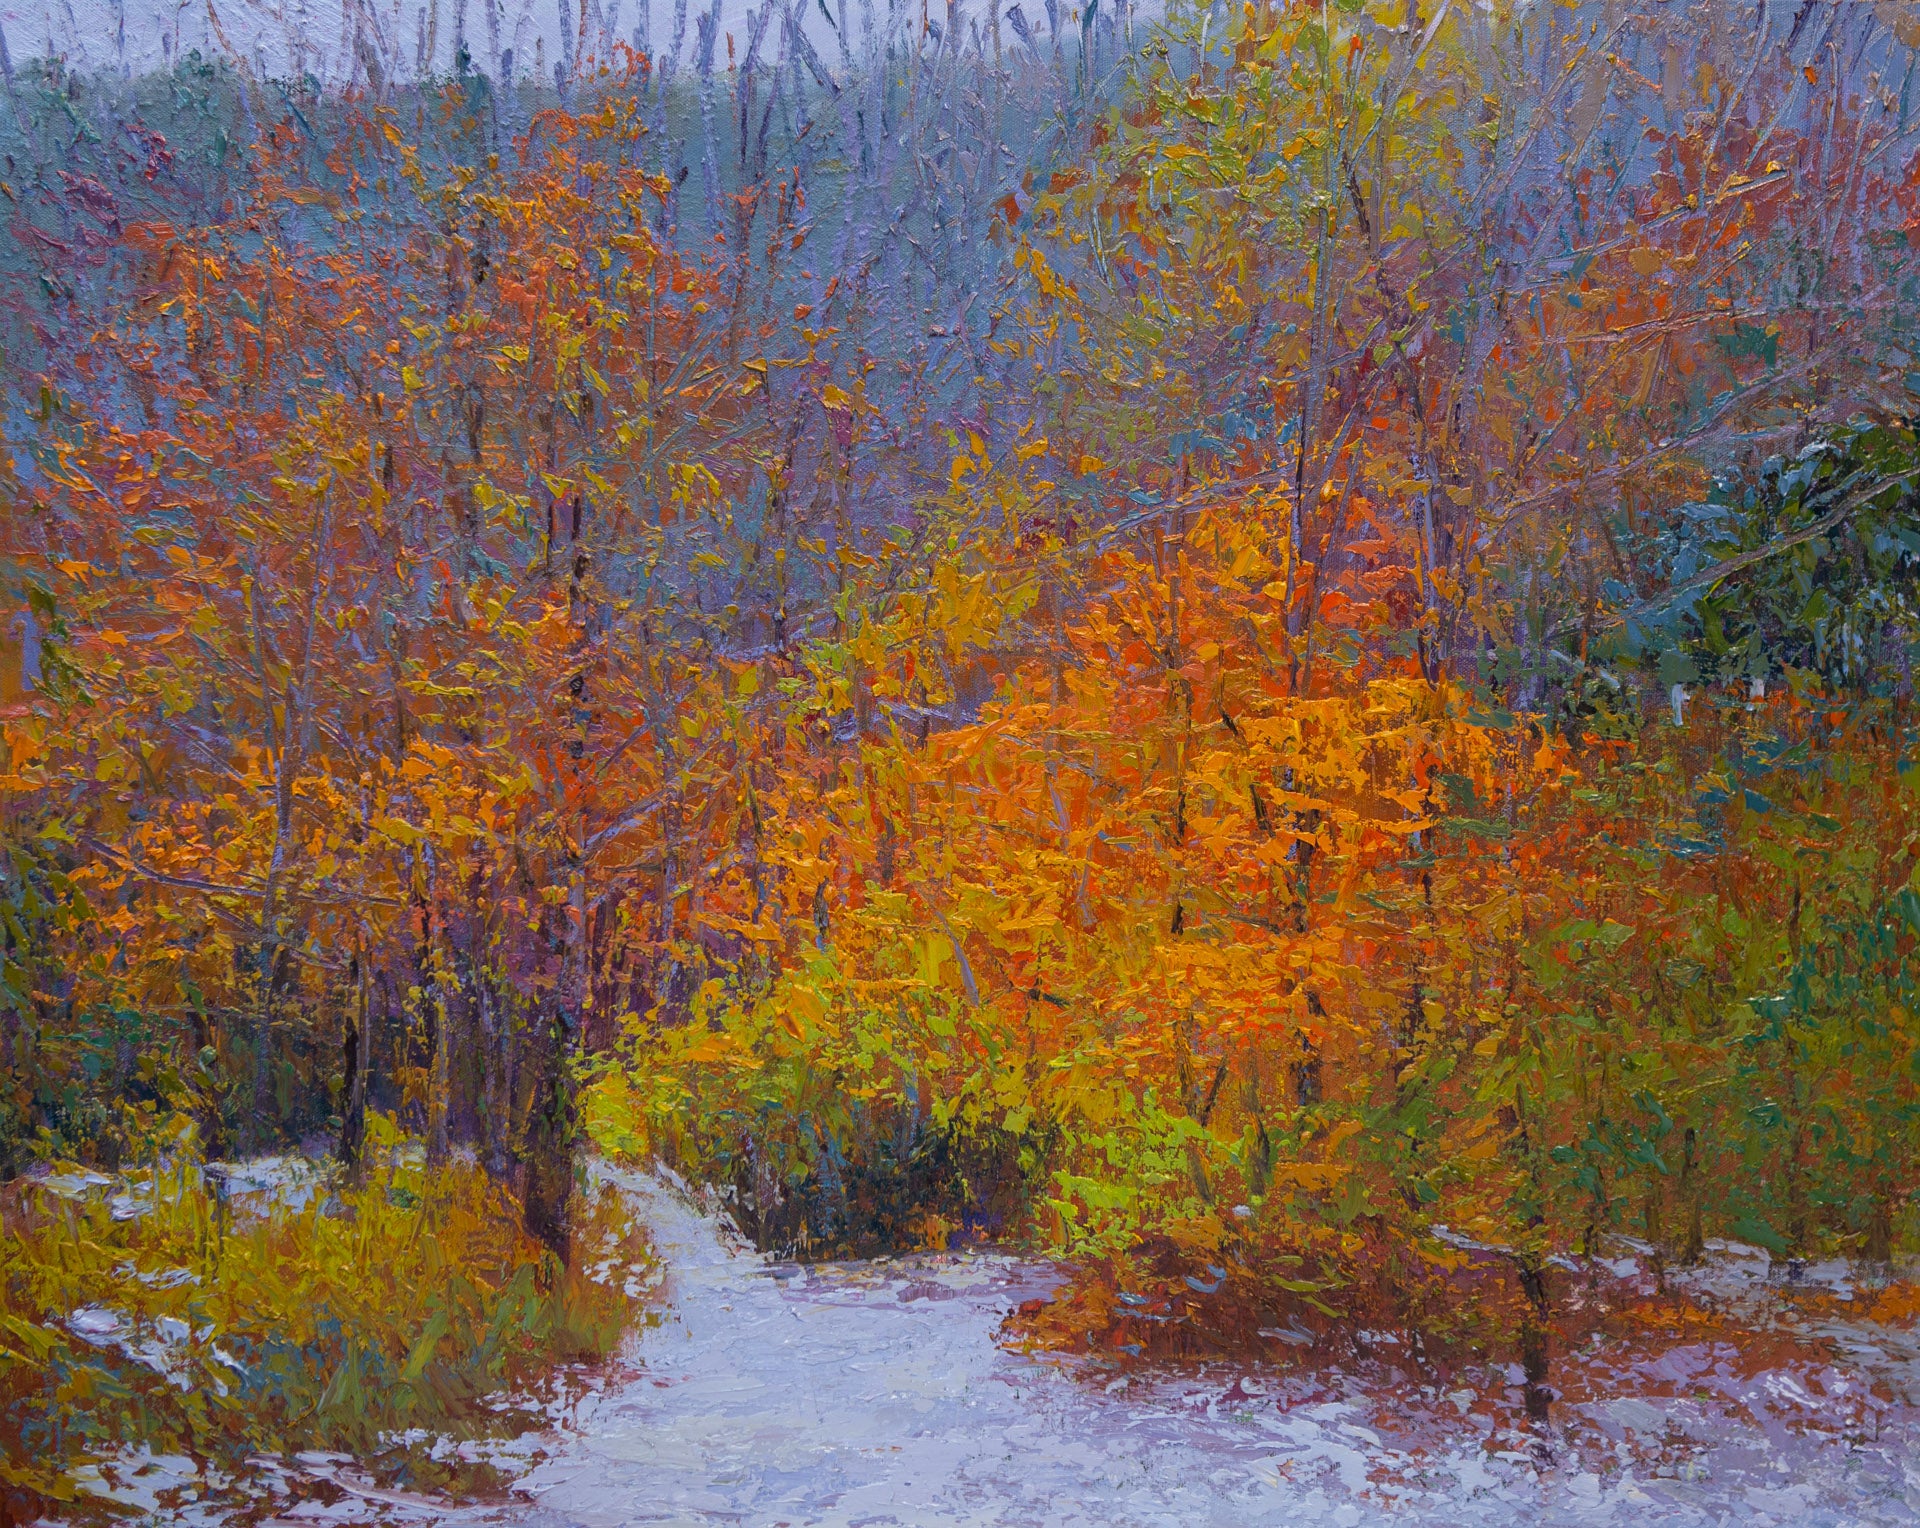 October Snow (sold)